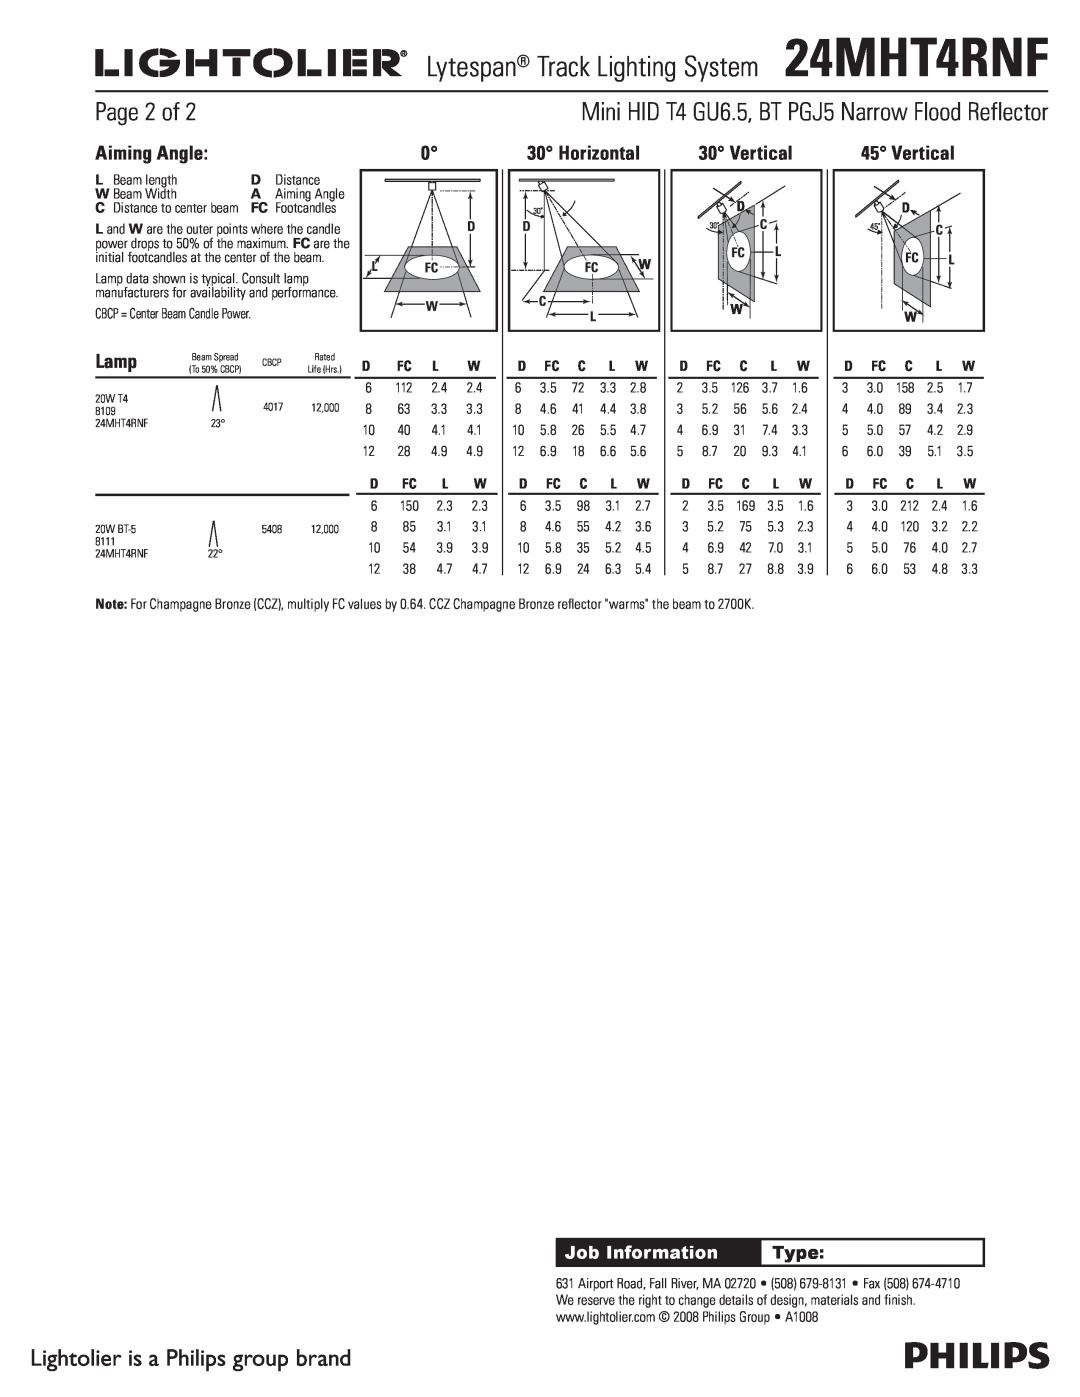 Lightolier 24MHT4RNF manual Page 2 of, Aiming Angle, Lamp, Horizontal, Vertical, Lightolier is a Philips group brand, Type 